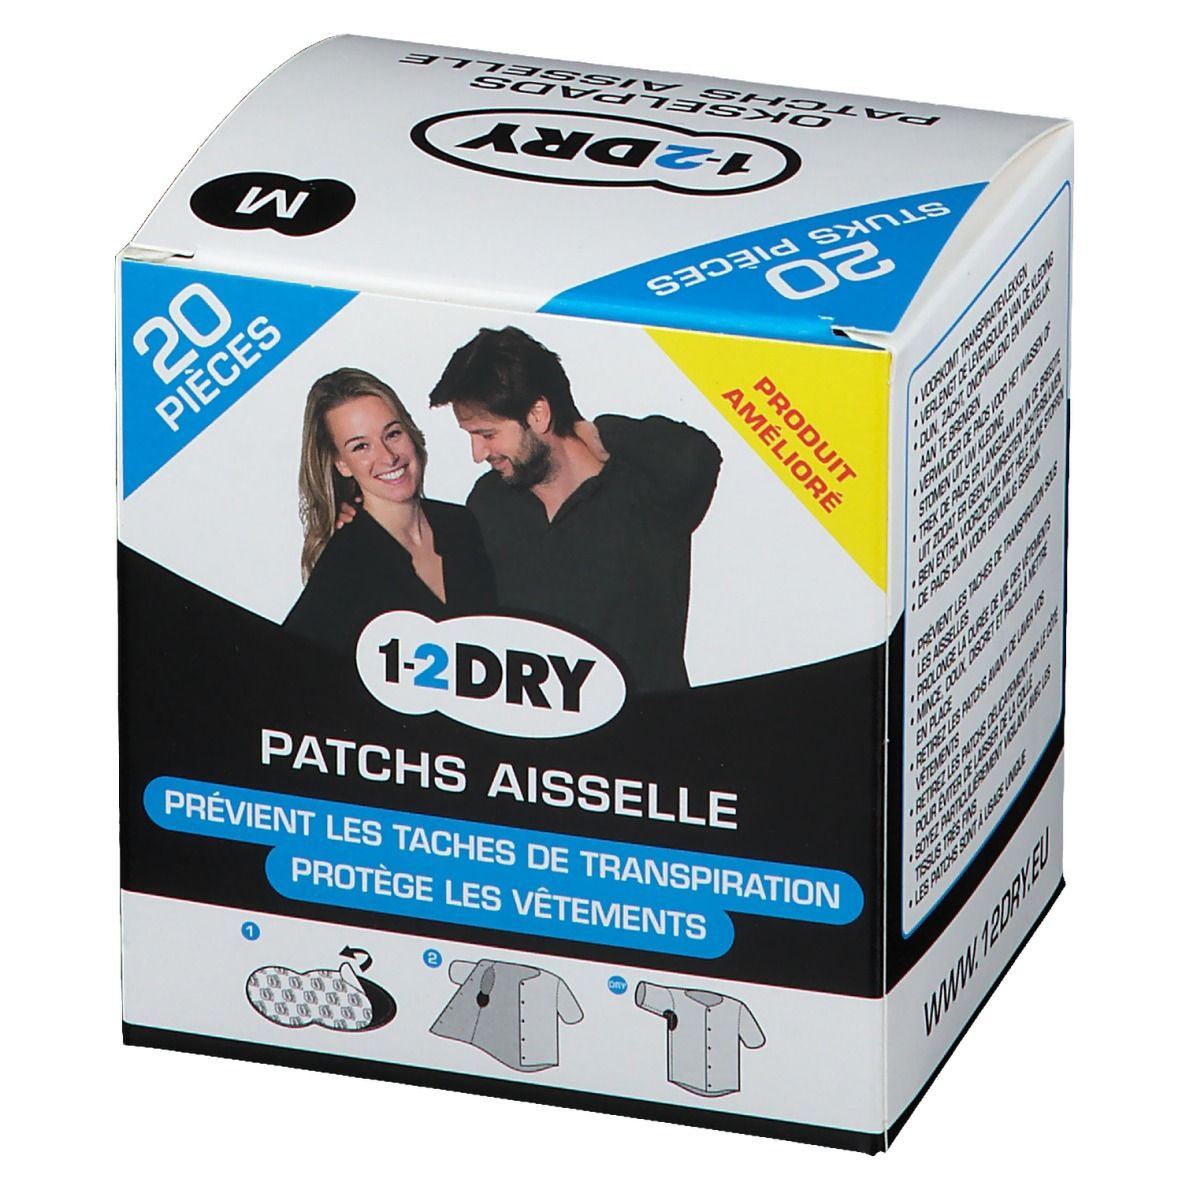 1-2DRY Patches Aiselle Dark Medium P2-BX-MD